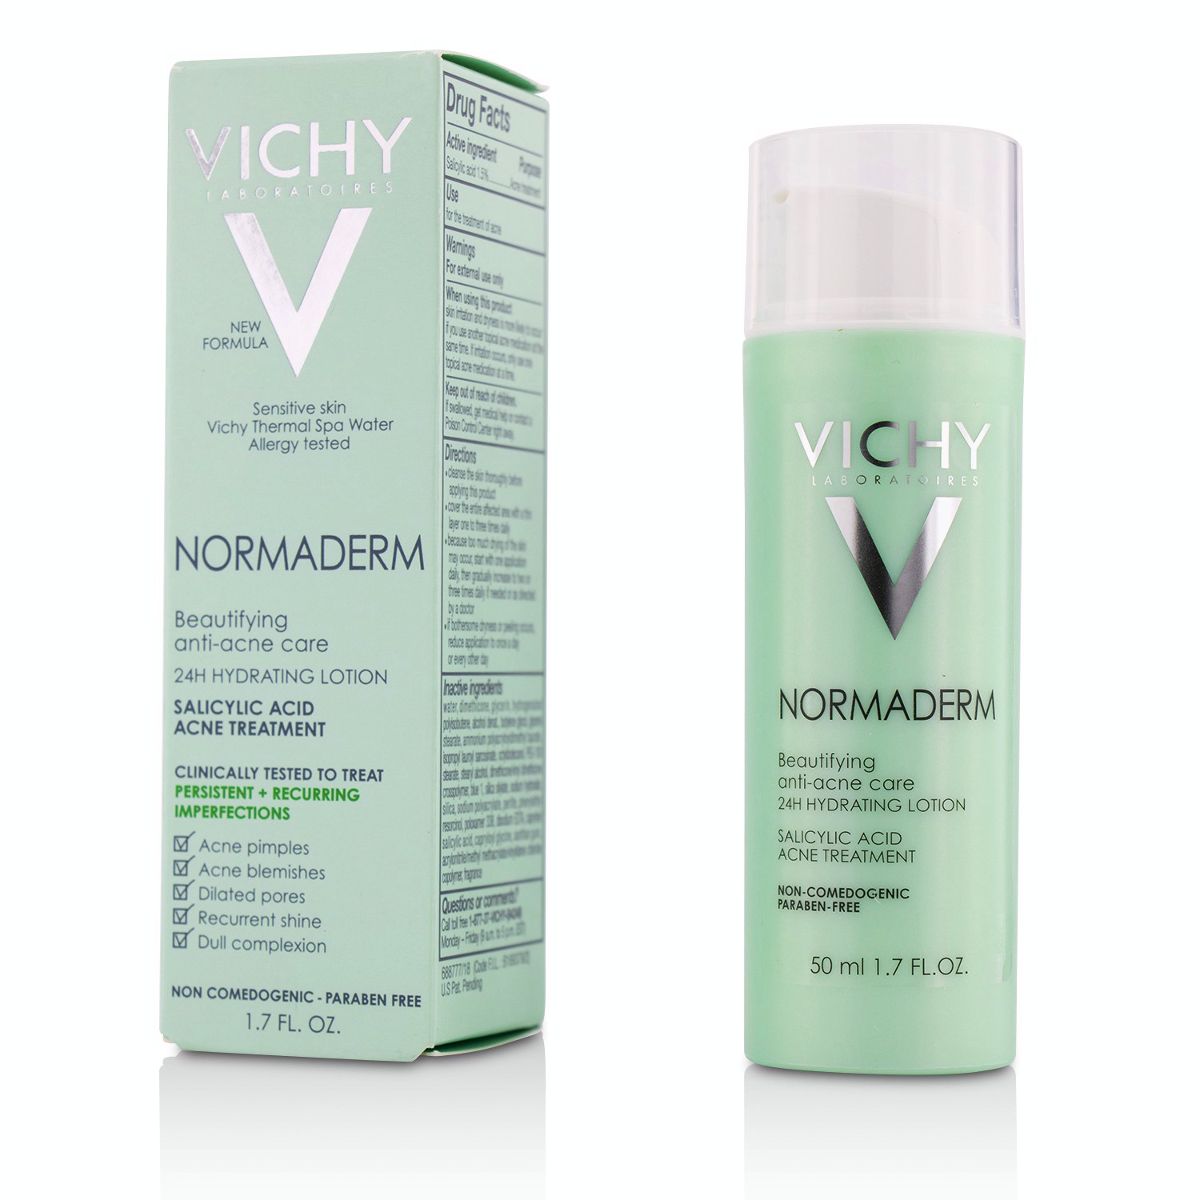 Normaderm Beautifying Anti-Acne Care - 24H Hydrating Lotion Salicylic Acid Acne Treatment Vichy Image